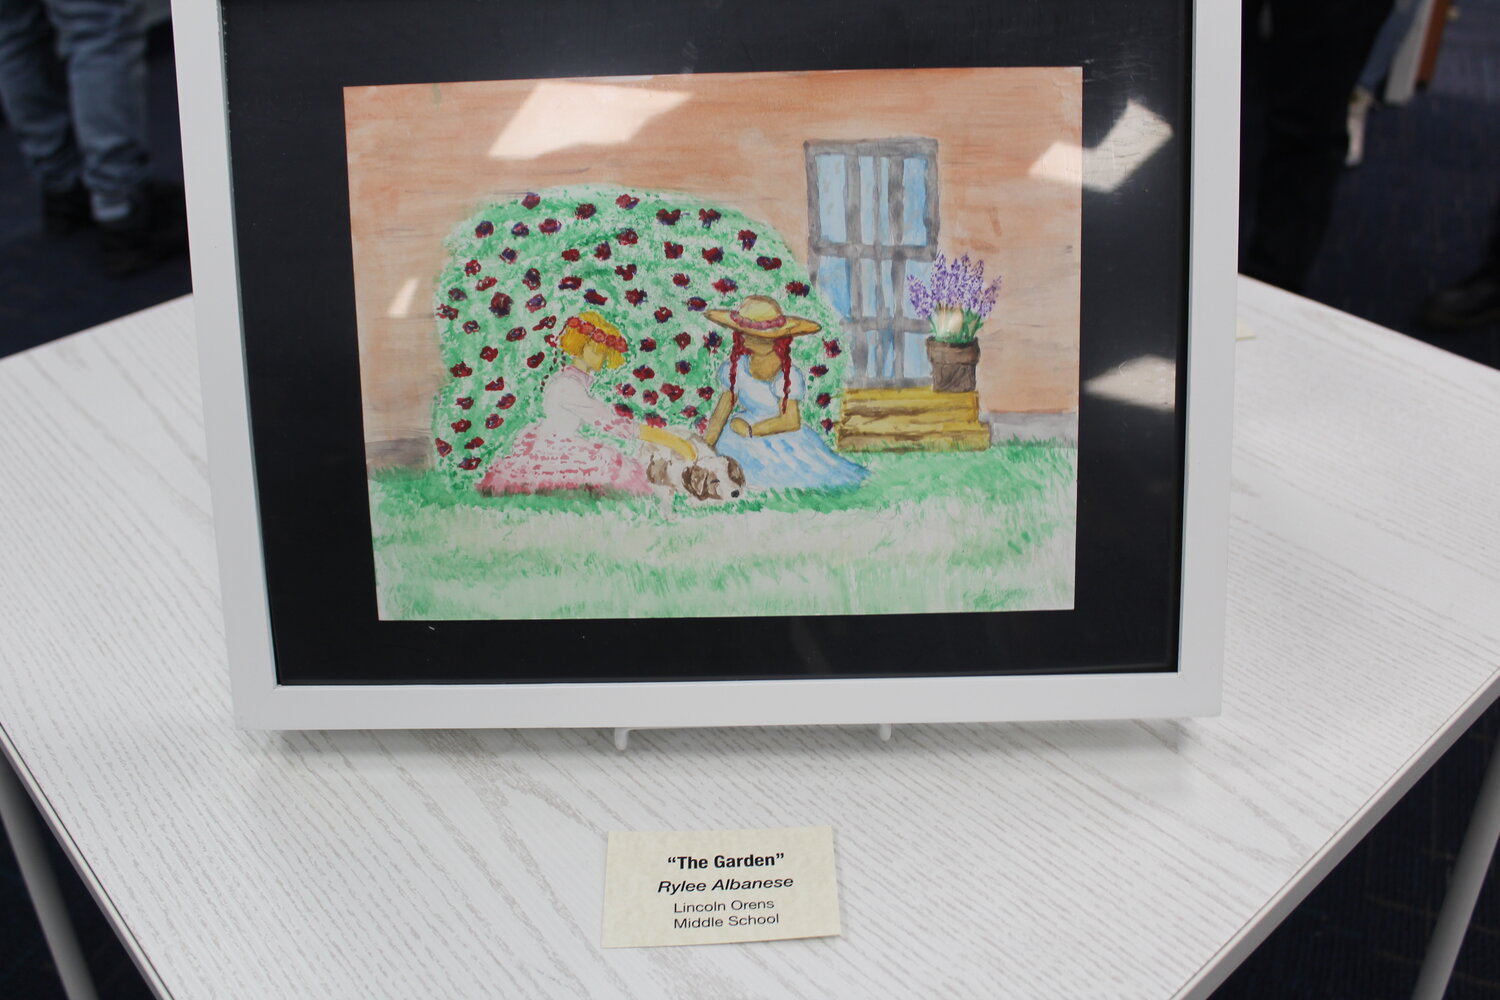 A few middle school pieces were also on display at the district art show.